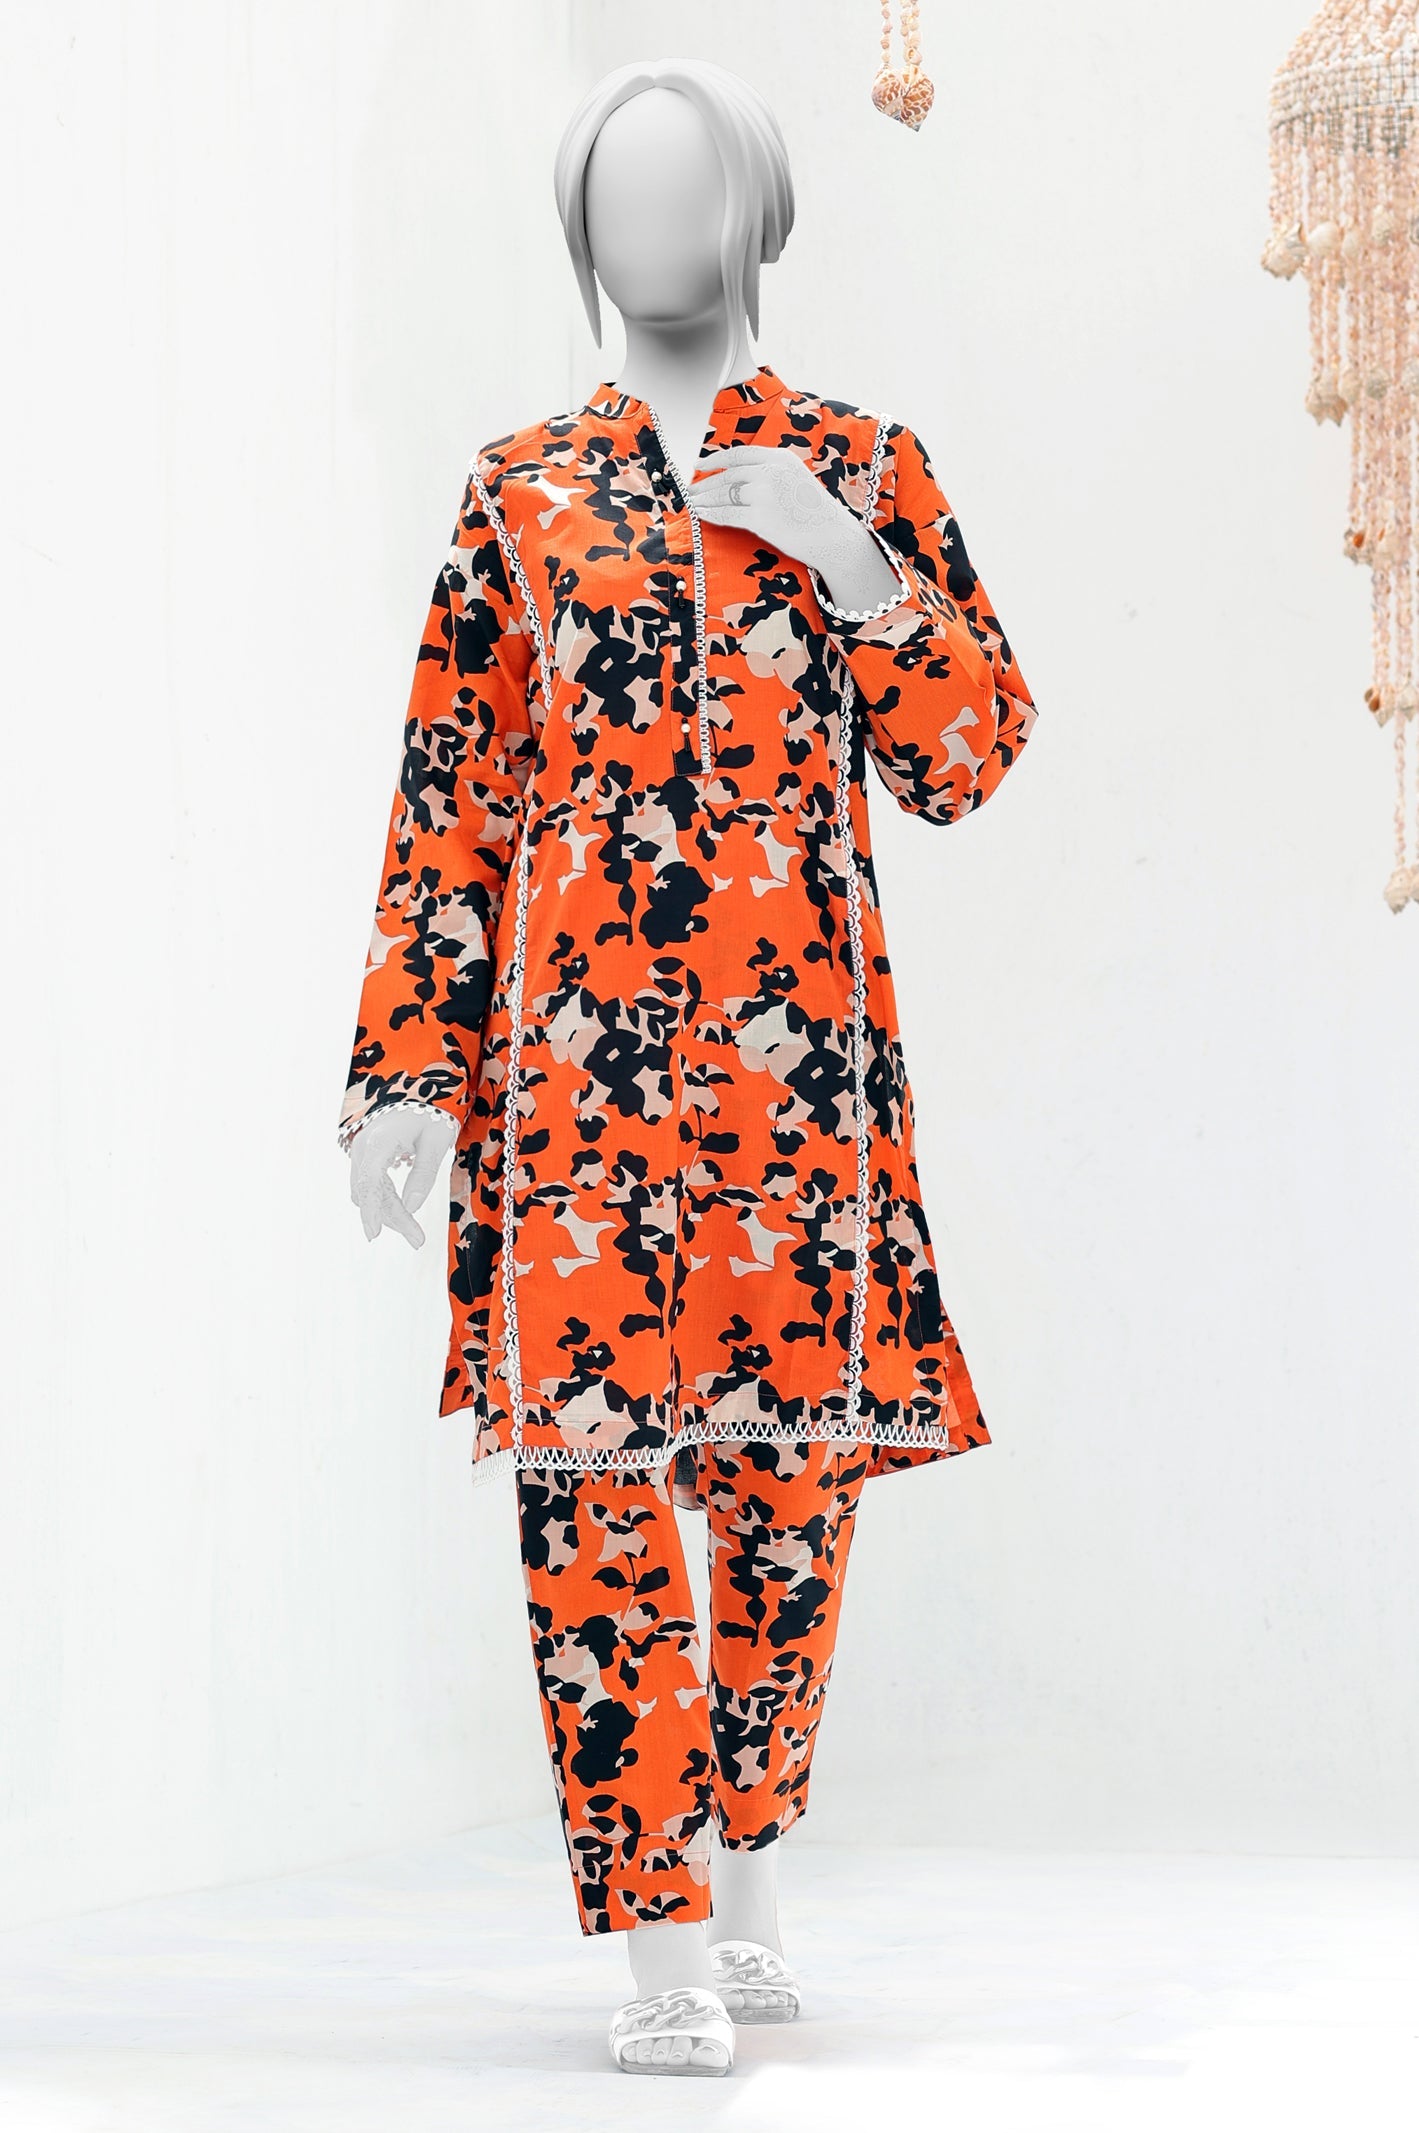 2PC Printed Orange Suit From Diners